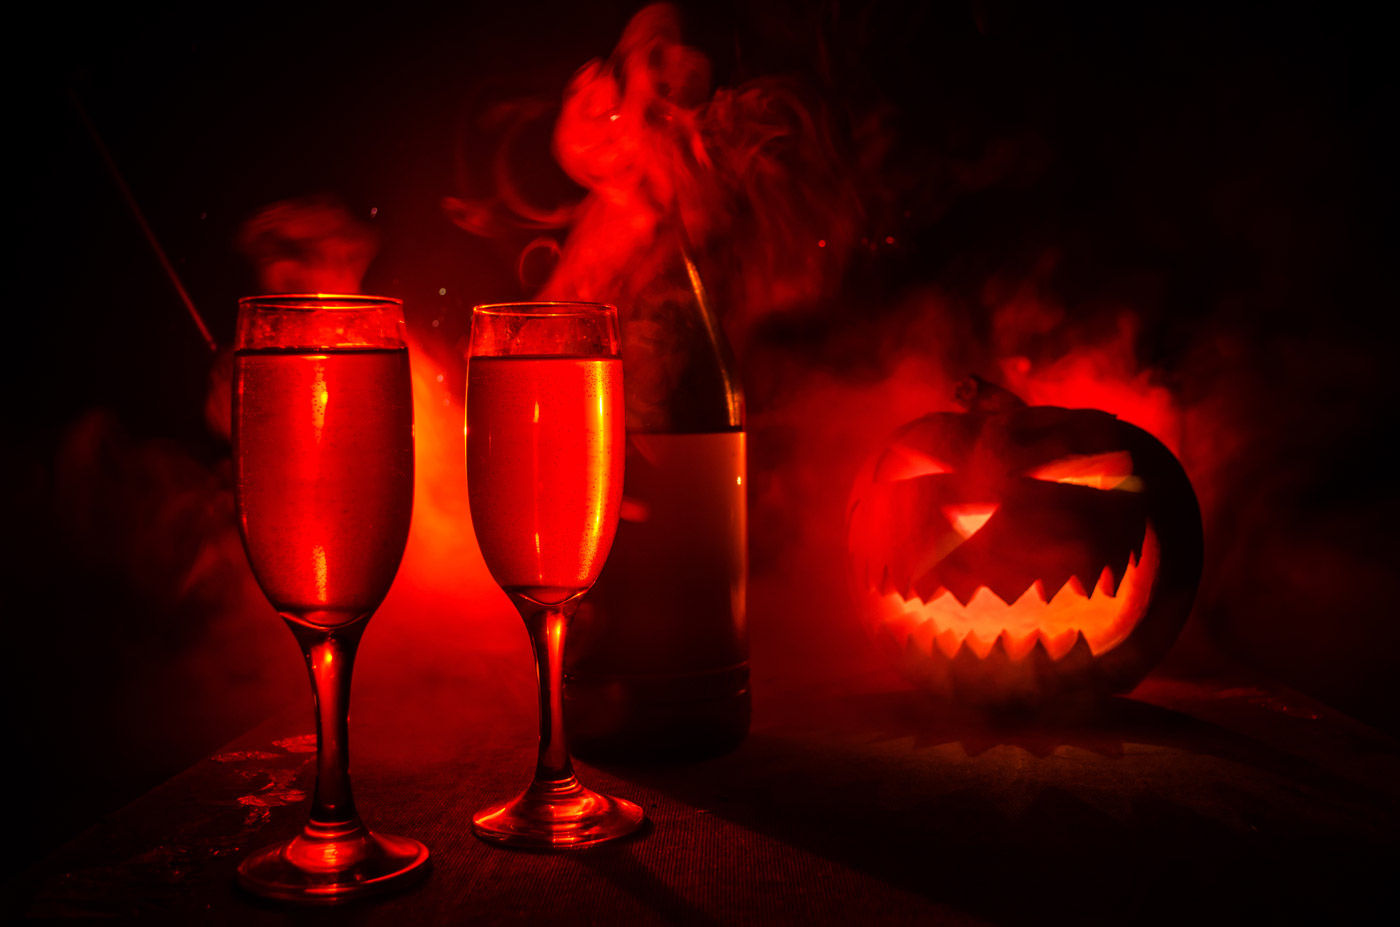 Sip some wine and carve a pumpkin at one of the events taking place near the Comfort Suites’ accommodations in Kelowna this Halloween.